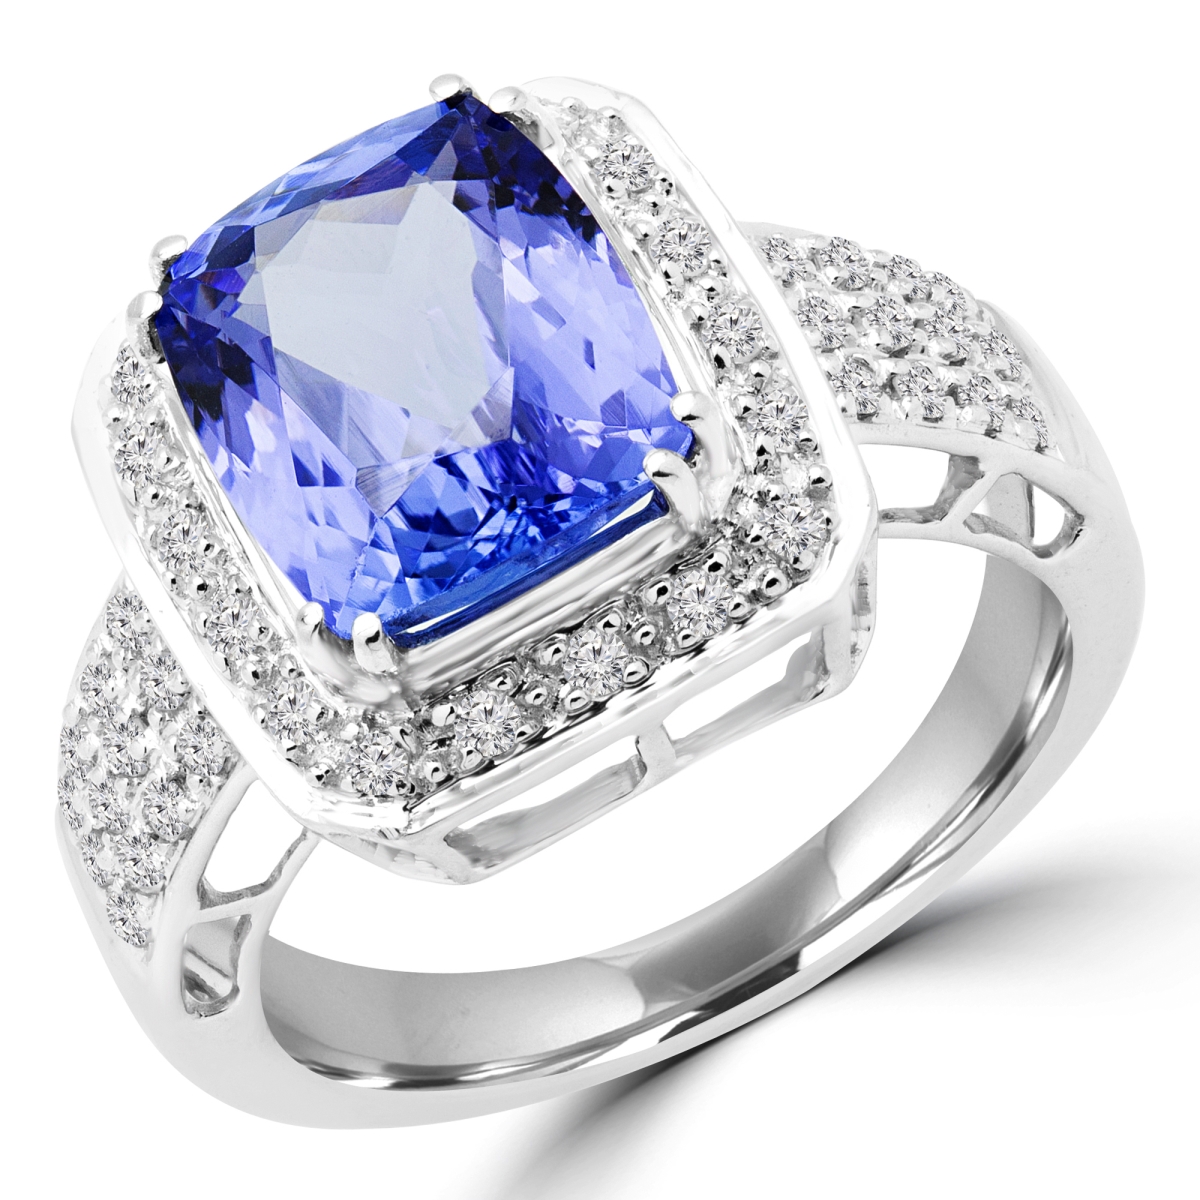 Picture of Majesty Diamonds MD180161-8.75 3.5 CTW Cushion Purple Tanzanite Halo Cocktail Ring in 14K White Gold - Size 8.75